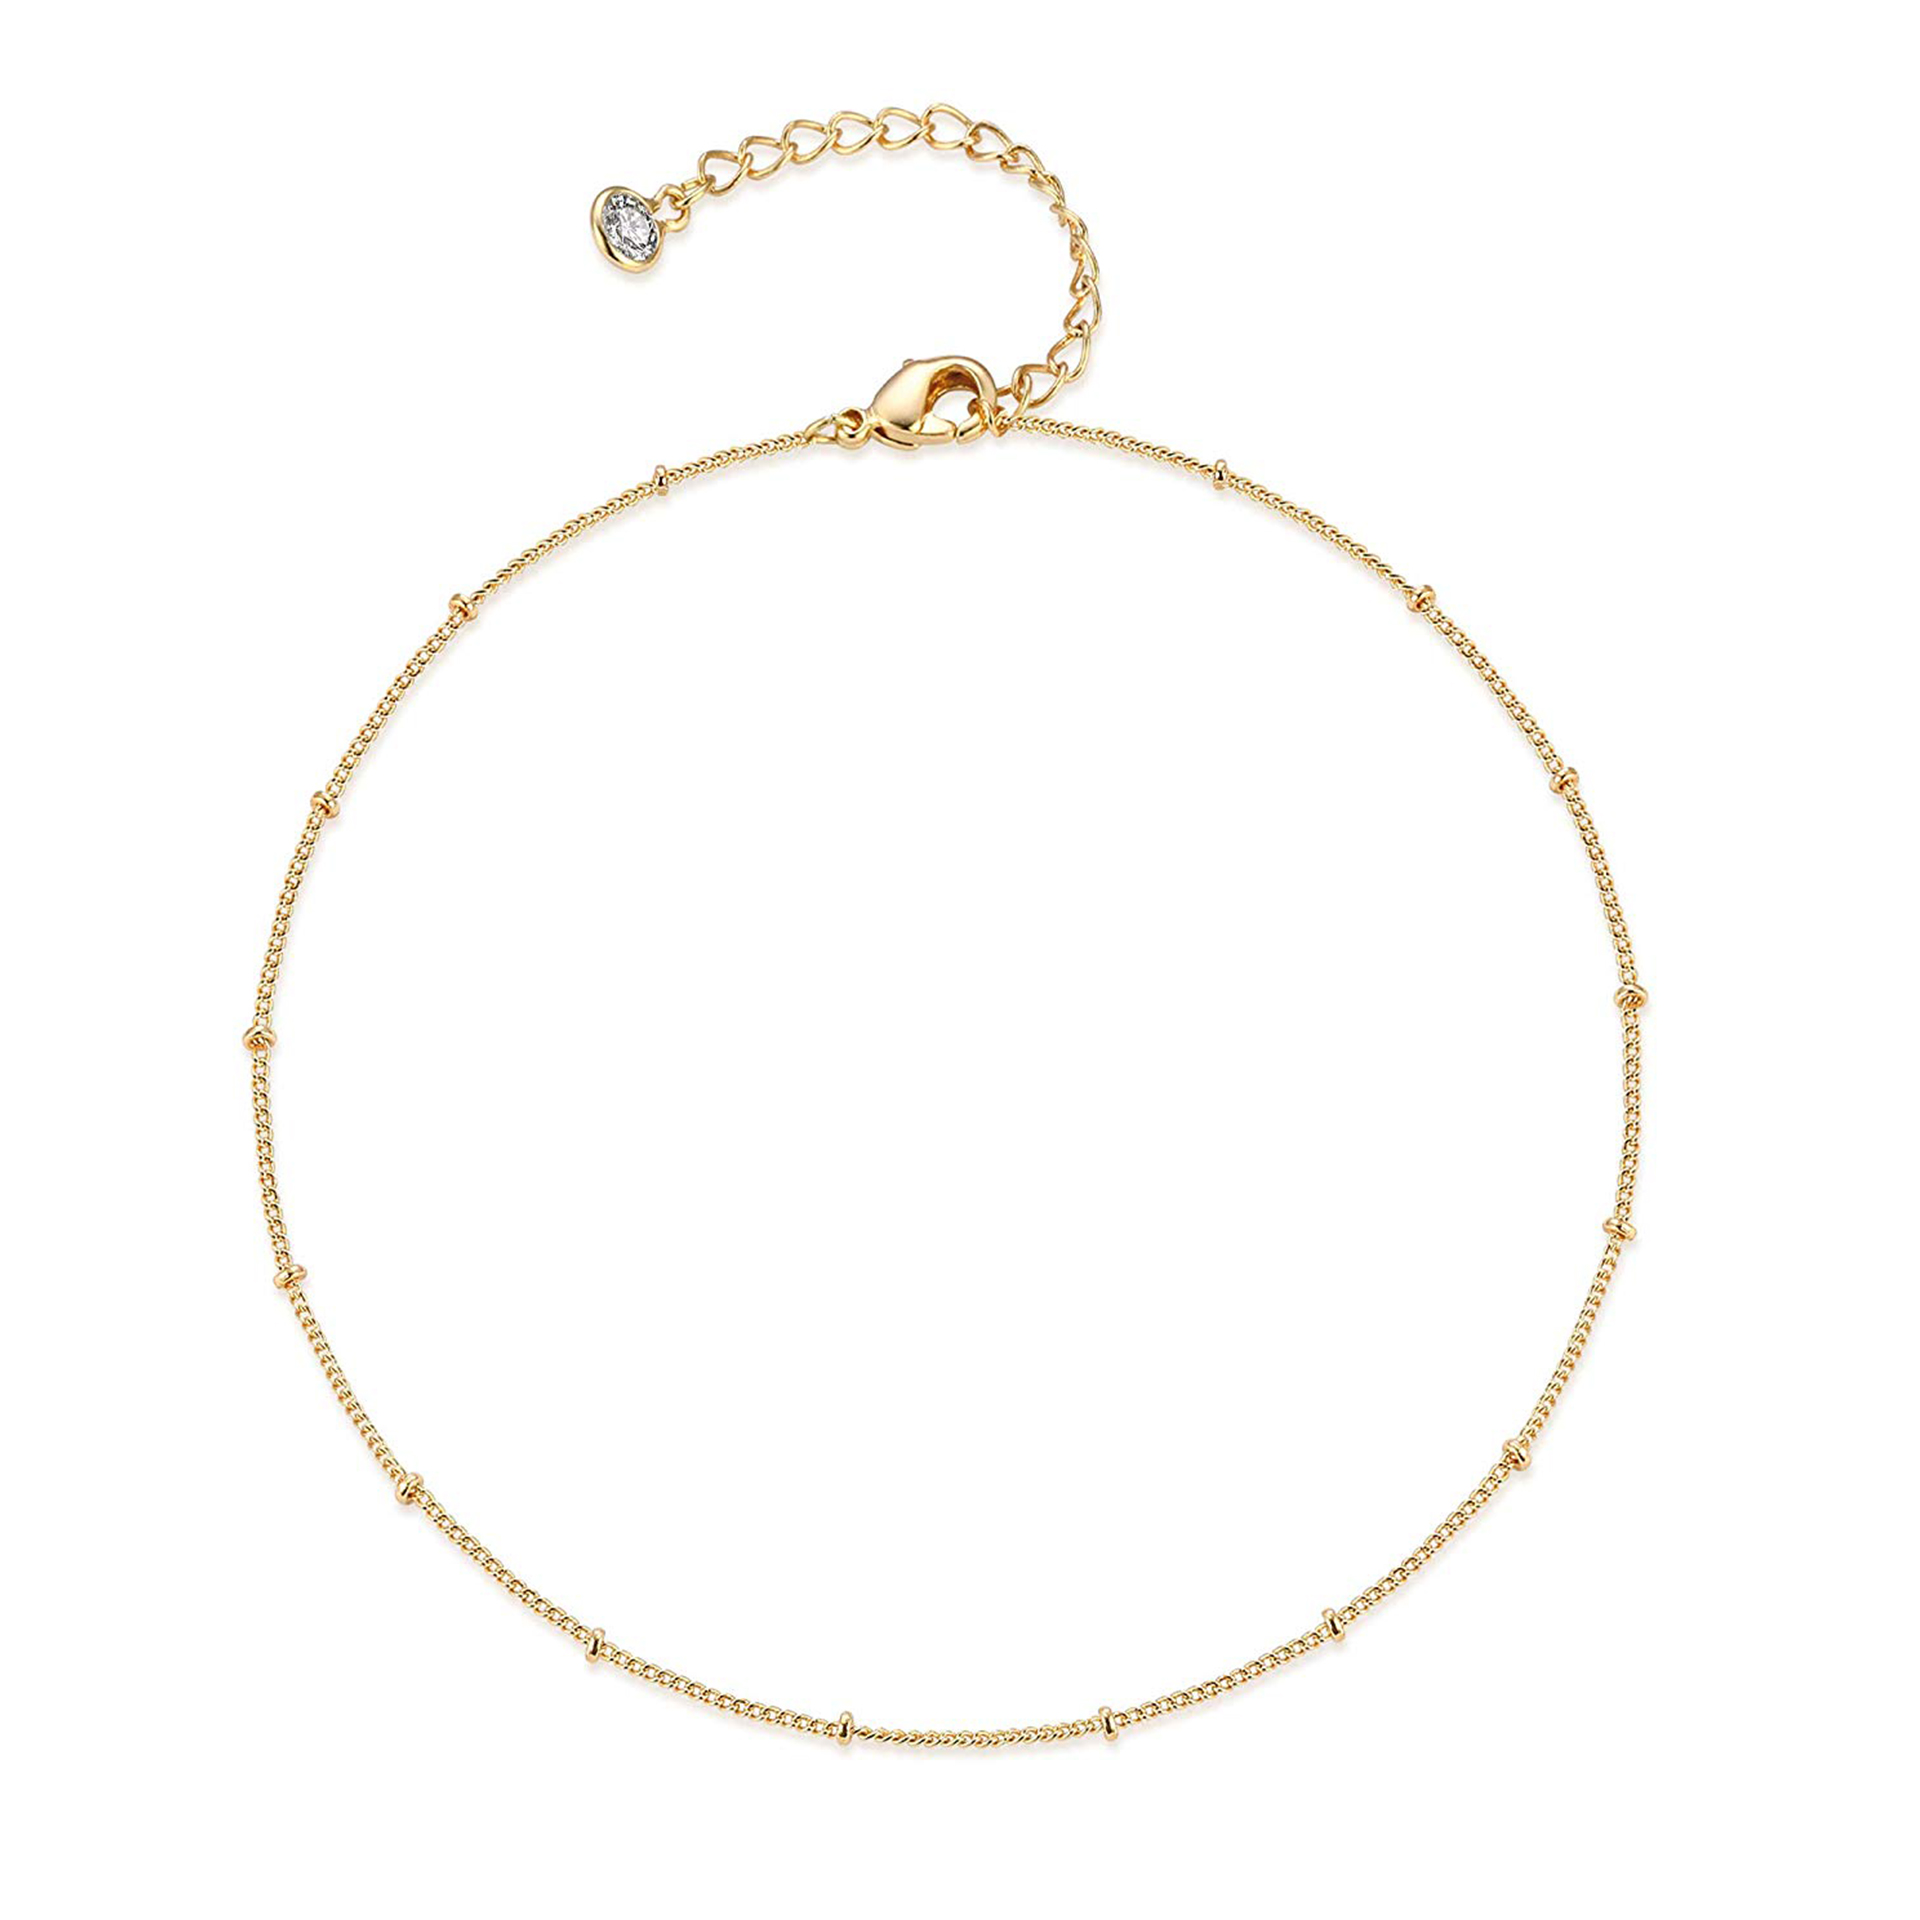 Mevecco Gold Dainty Satellite Chain Anklet 14K Gold Plated